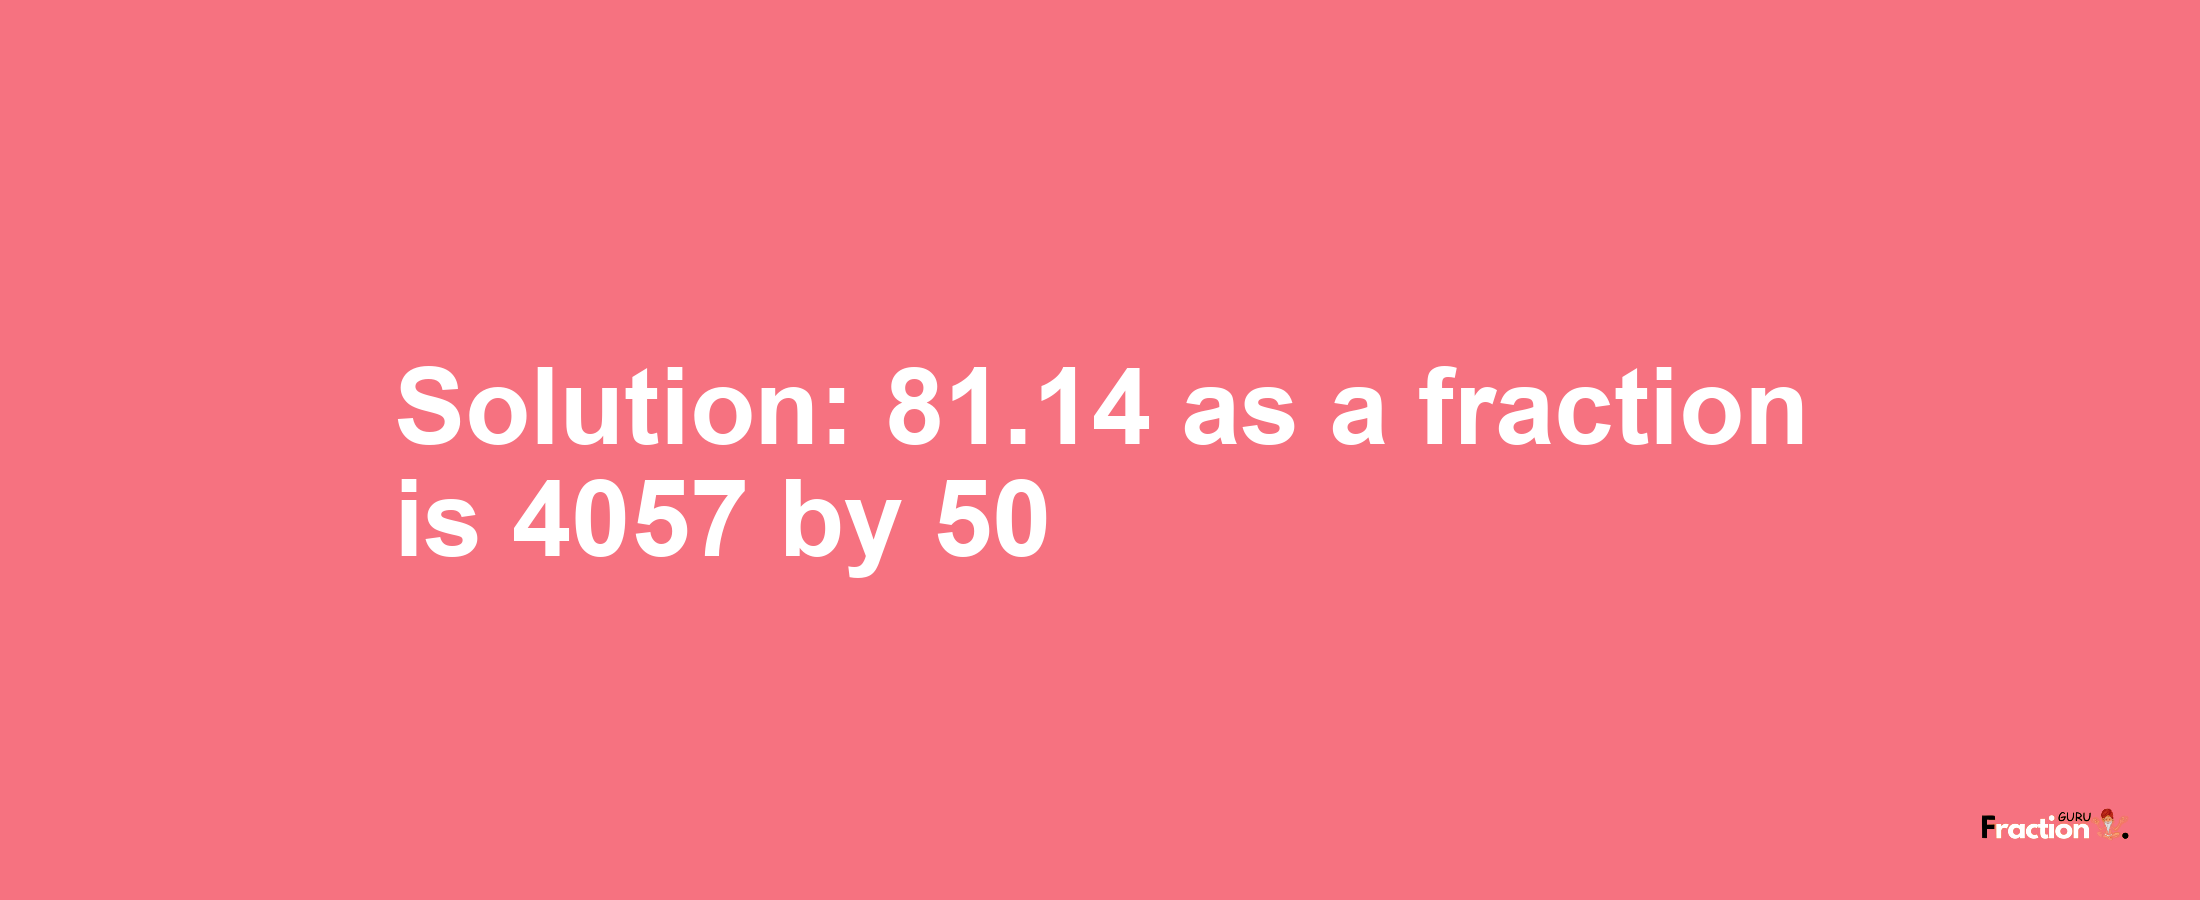 Solution:81.14 as a fraction is 4057/50